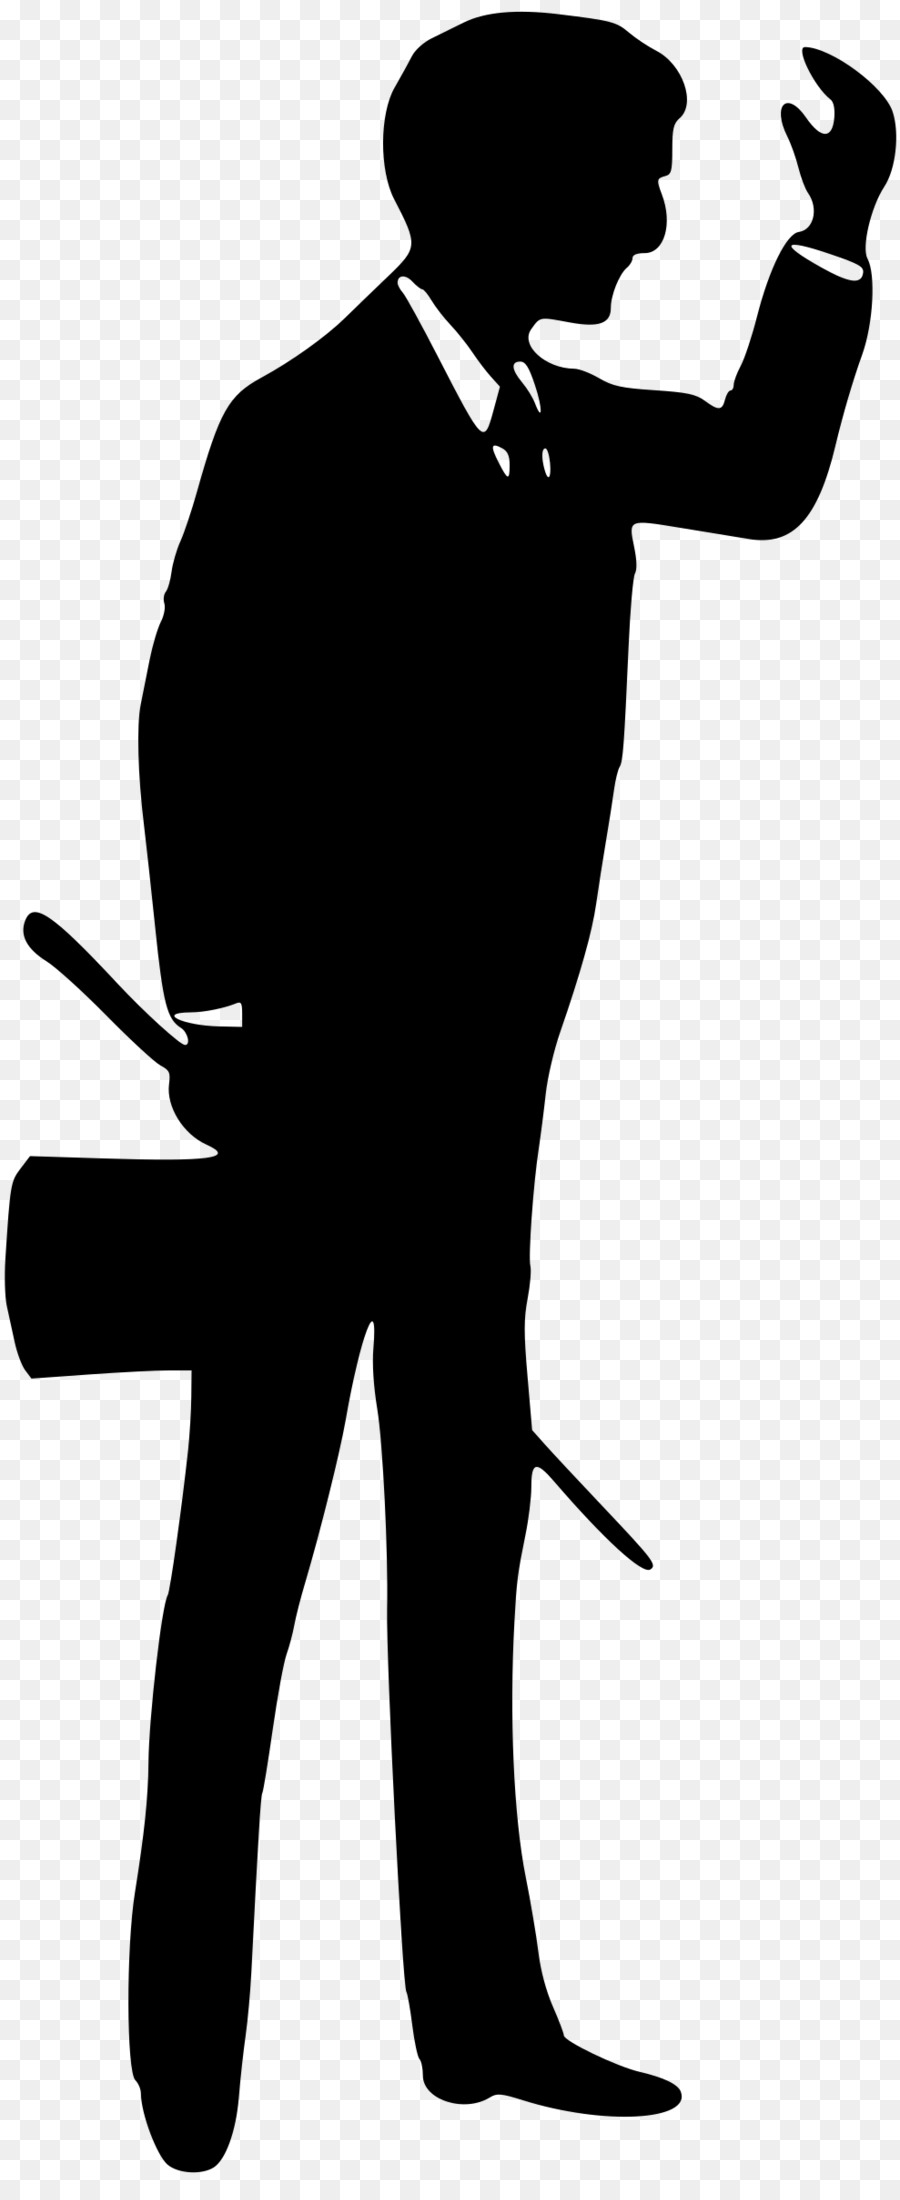 YouTube Silhouette Gentleman Clip art - man silhouette png download - 989*2400 - Free Transparent Youtube png Download.